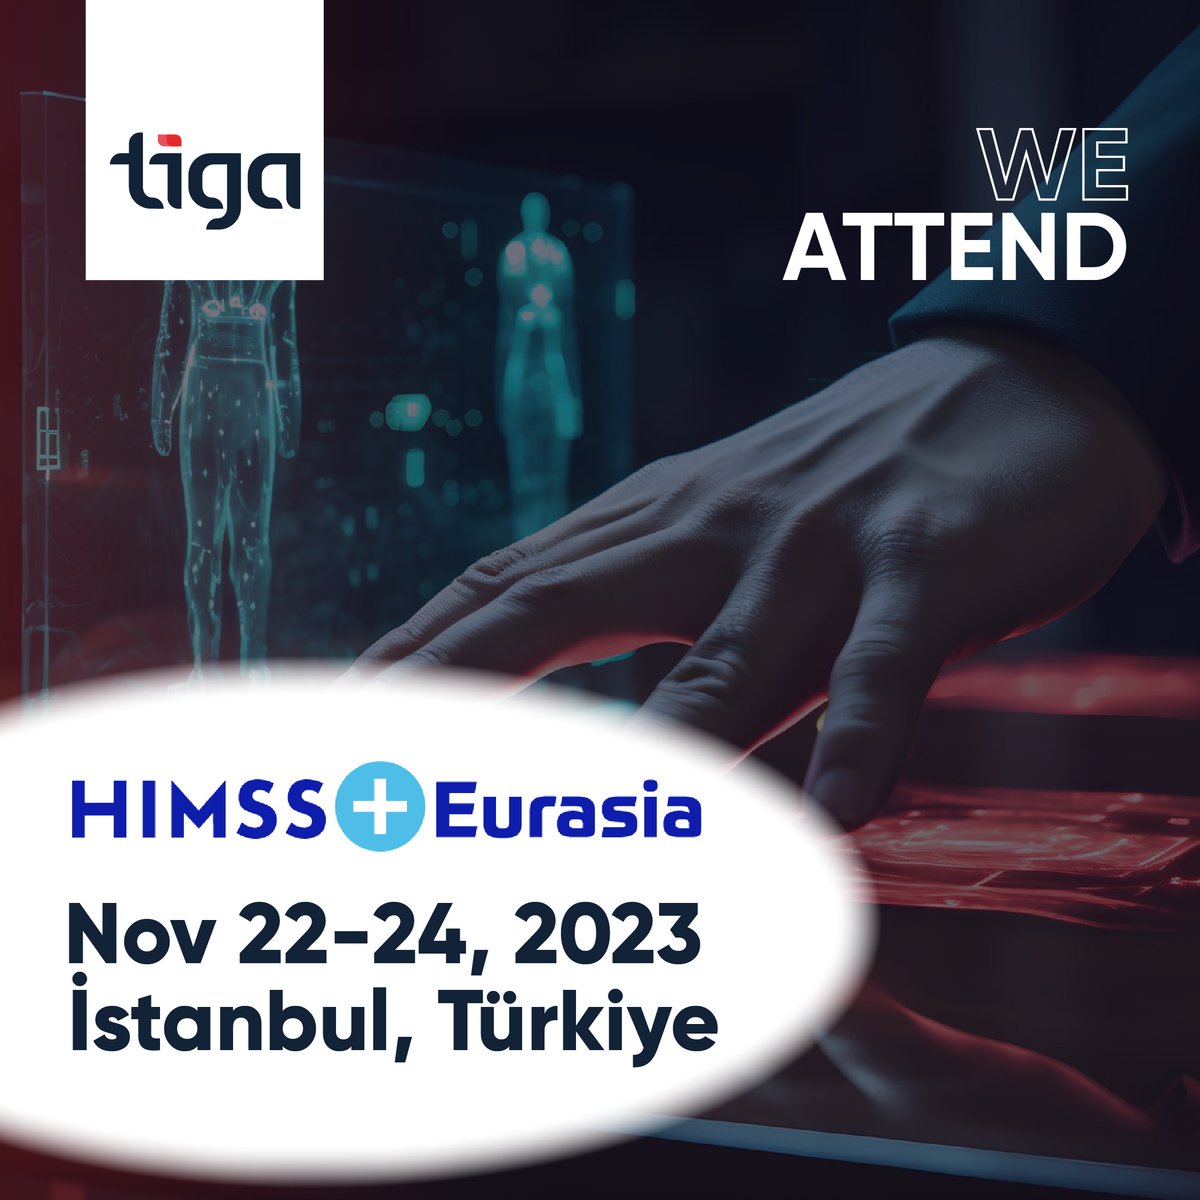 We're thrilled to declare Tiga's participation at HIMSS Eurasia, from November 22-24, 2023, where we proudly stand as a silver sponsor! Dive into the cutting edge of health technology with us, encompassing topics like healthcare interoperability, e-health, and intelligent…